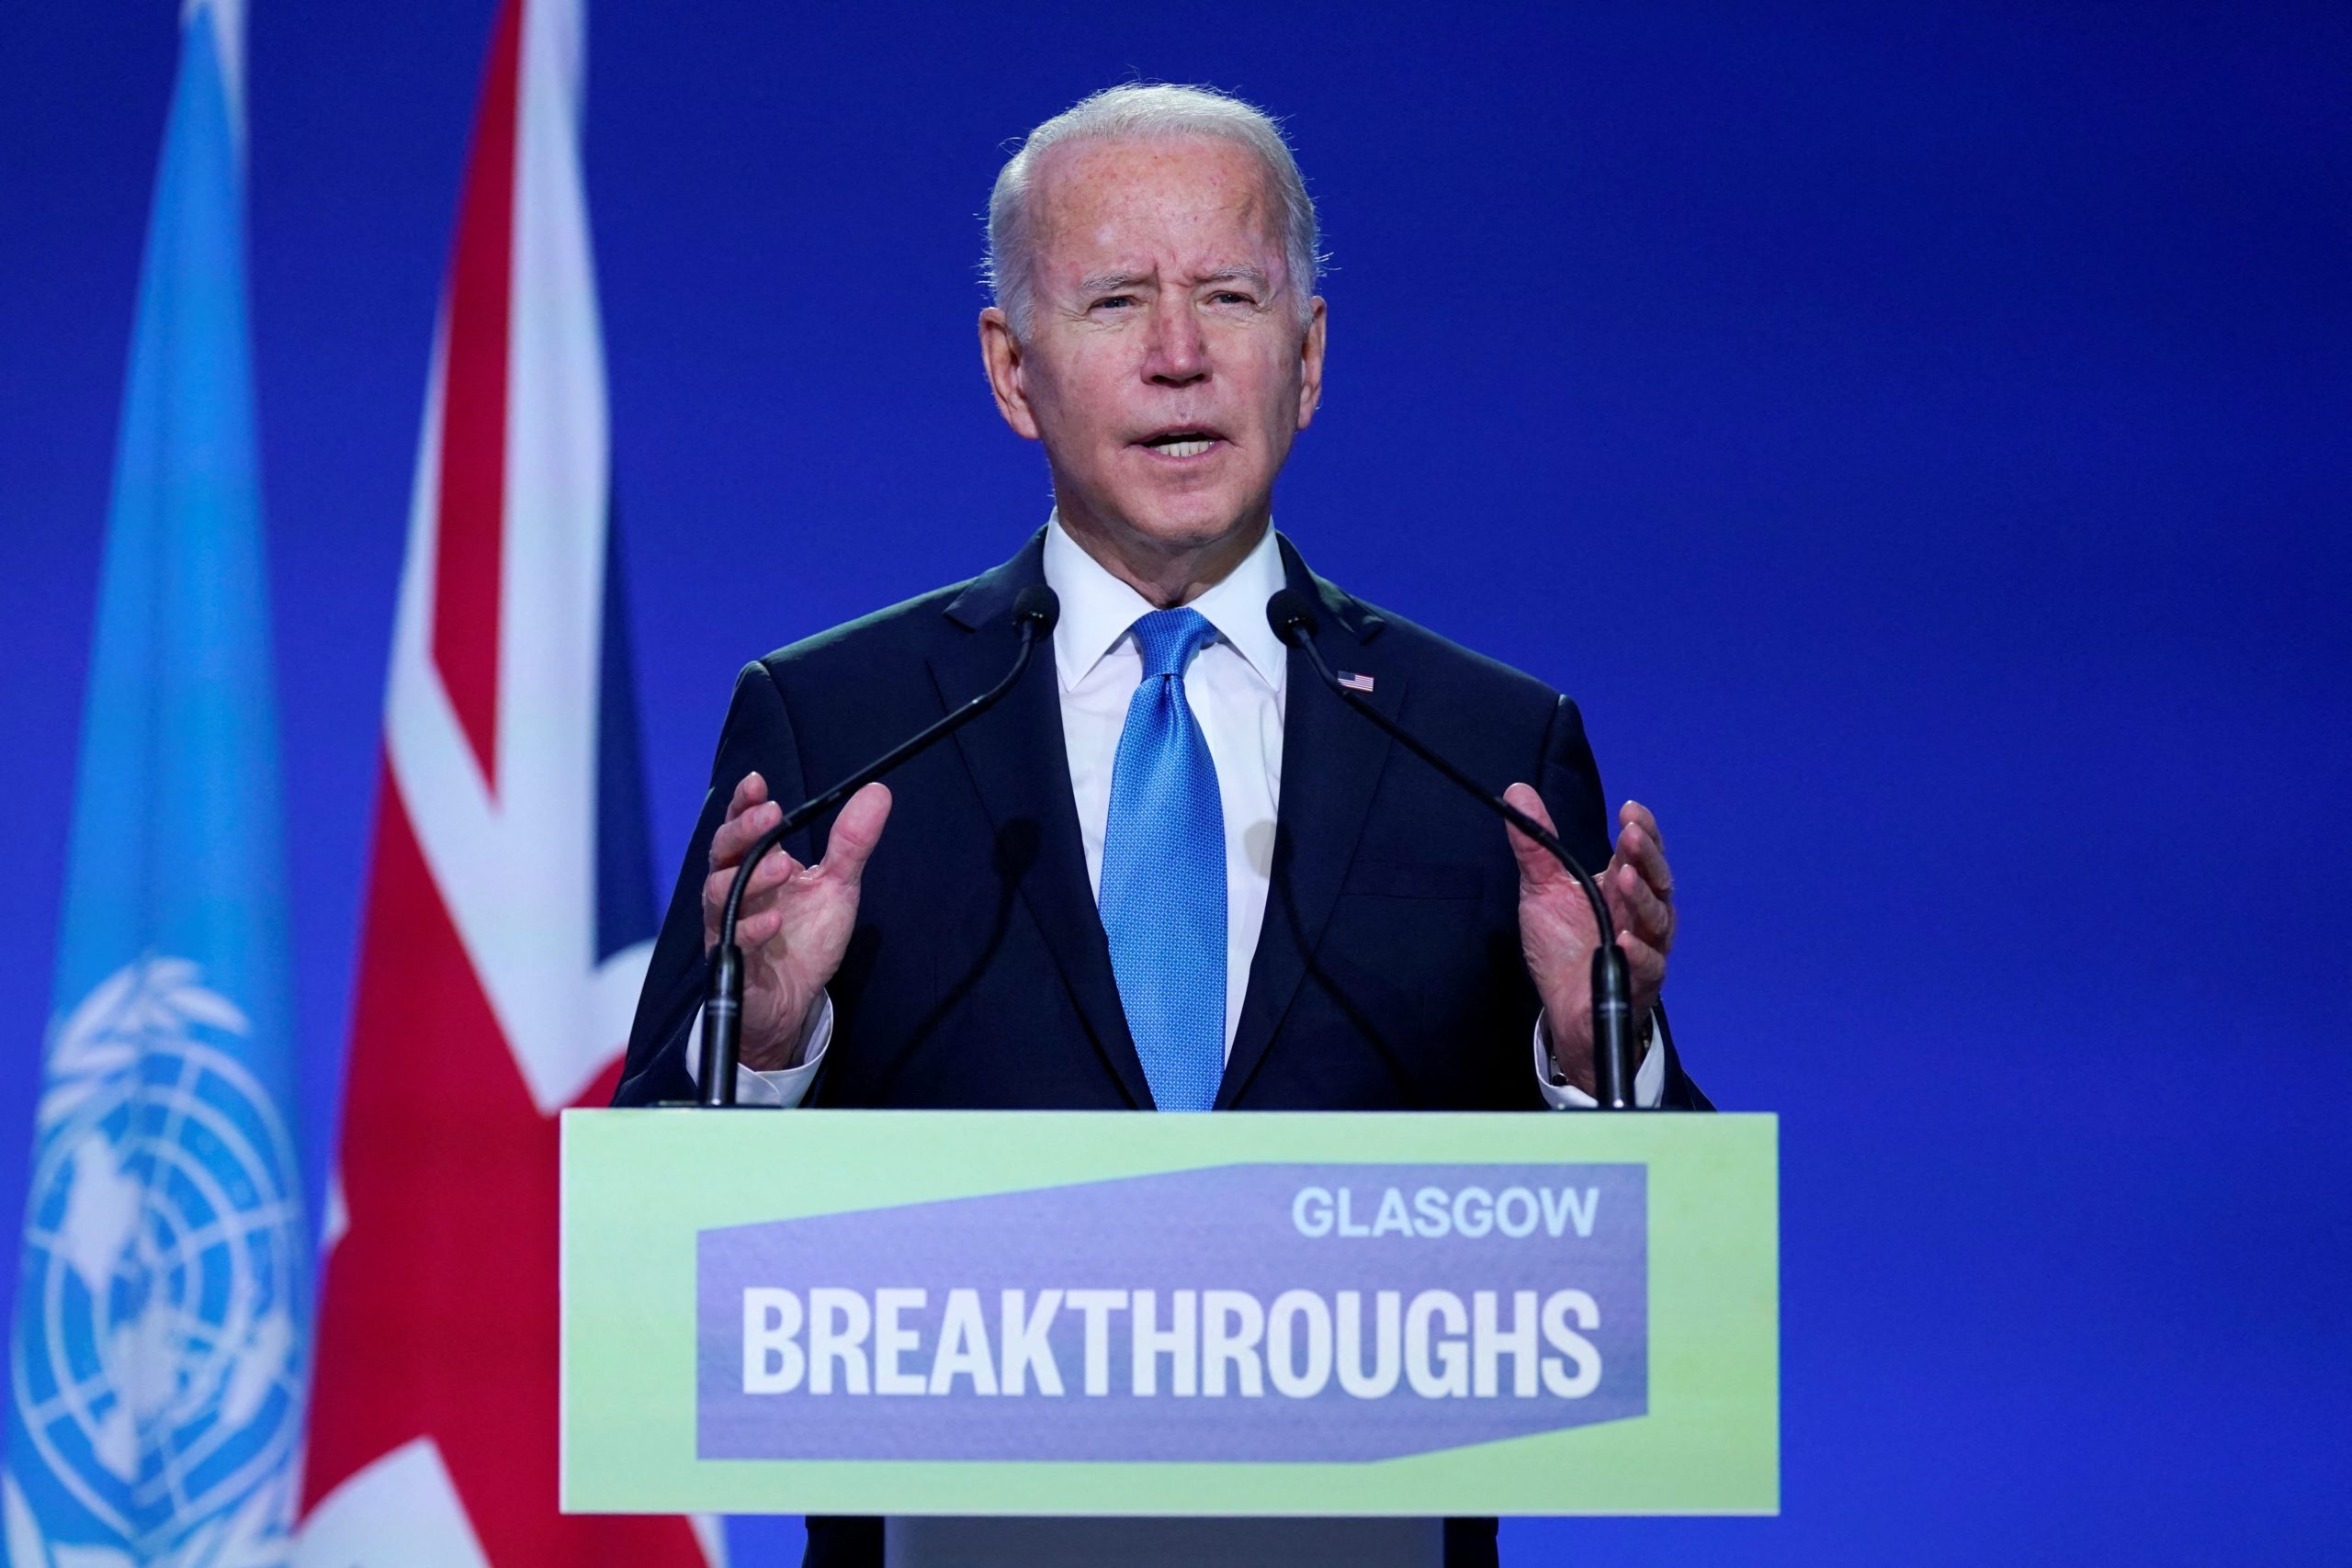 President Joe Biden delivers a speech at the UN Climate Change Conference in Glasgow, Scotland on Tuesday. (Evan Vucci/Pool/AFP via Getty Images)